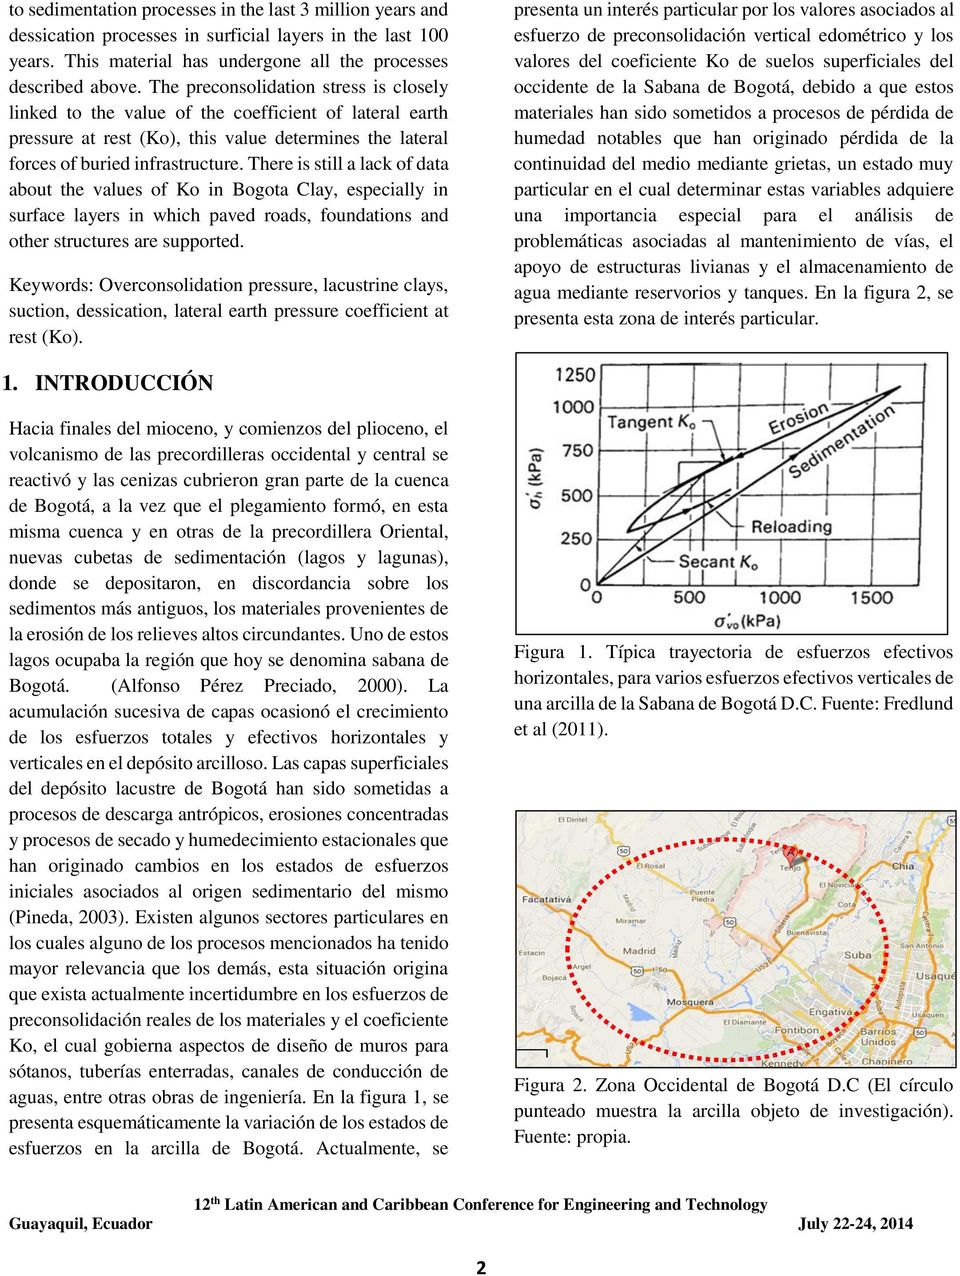 There is still a lack of data about the values of Ko in Bogota Clay, especially in surface layers in which paved roads, foundations and other structures are supported.